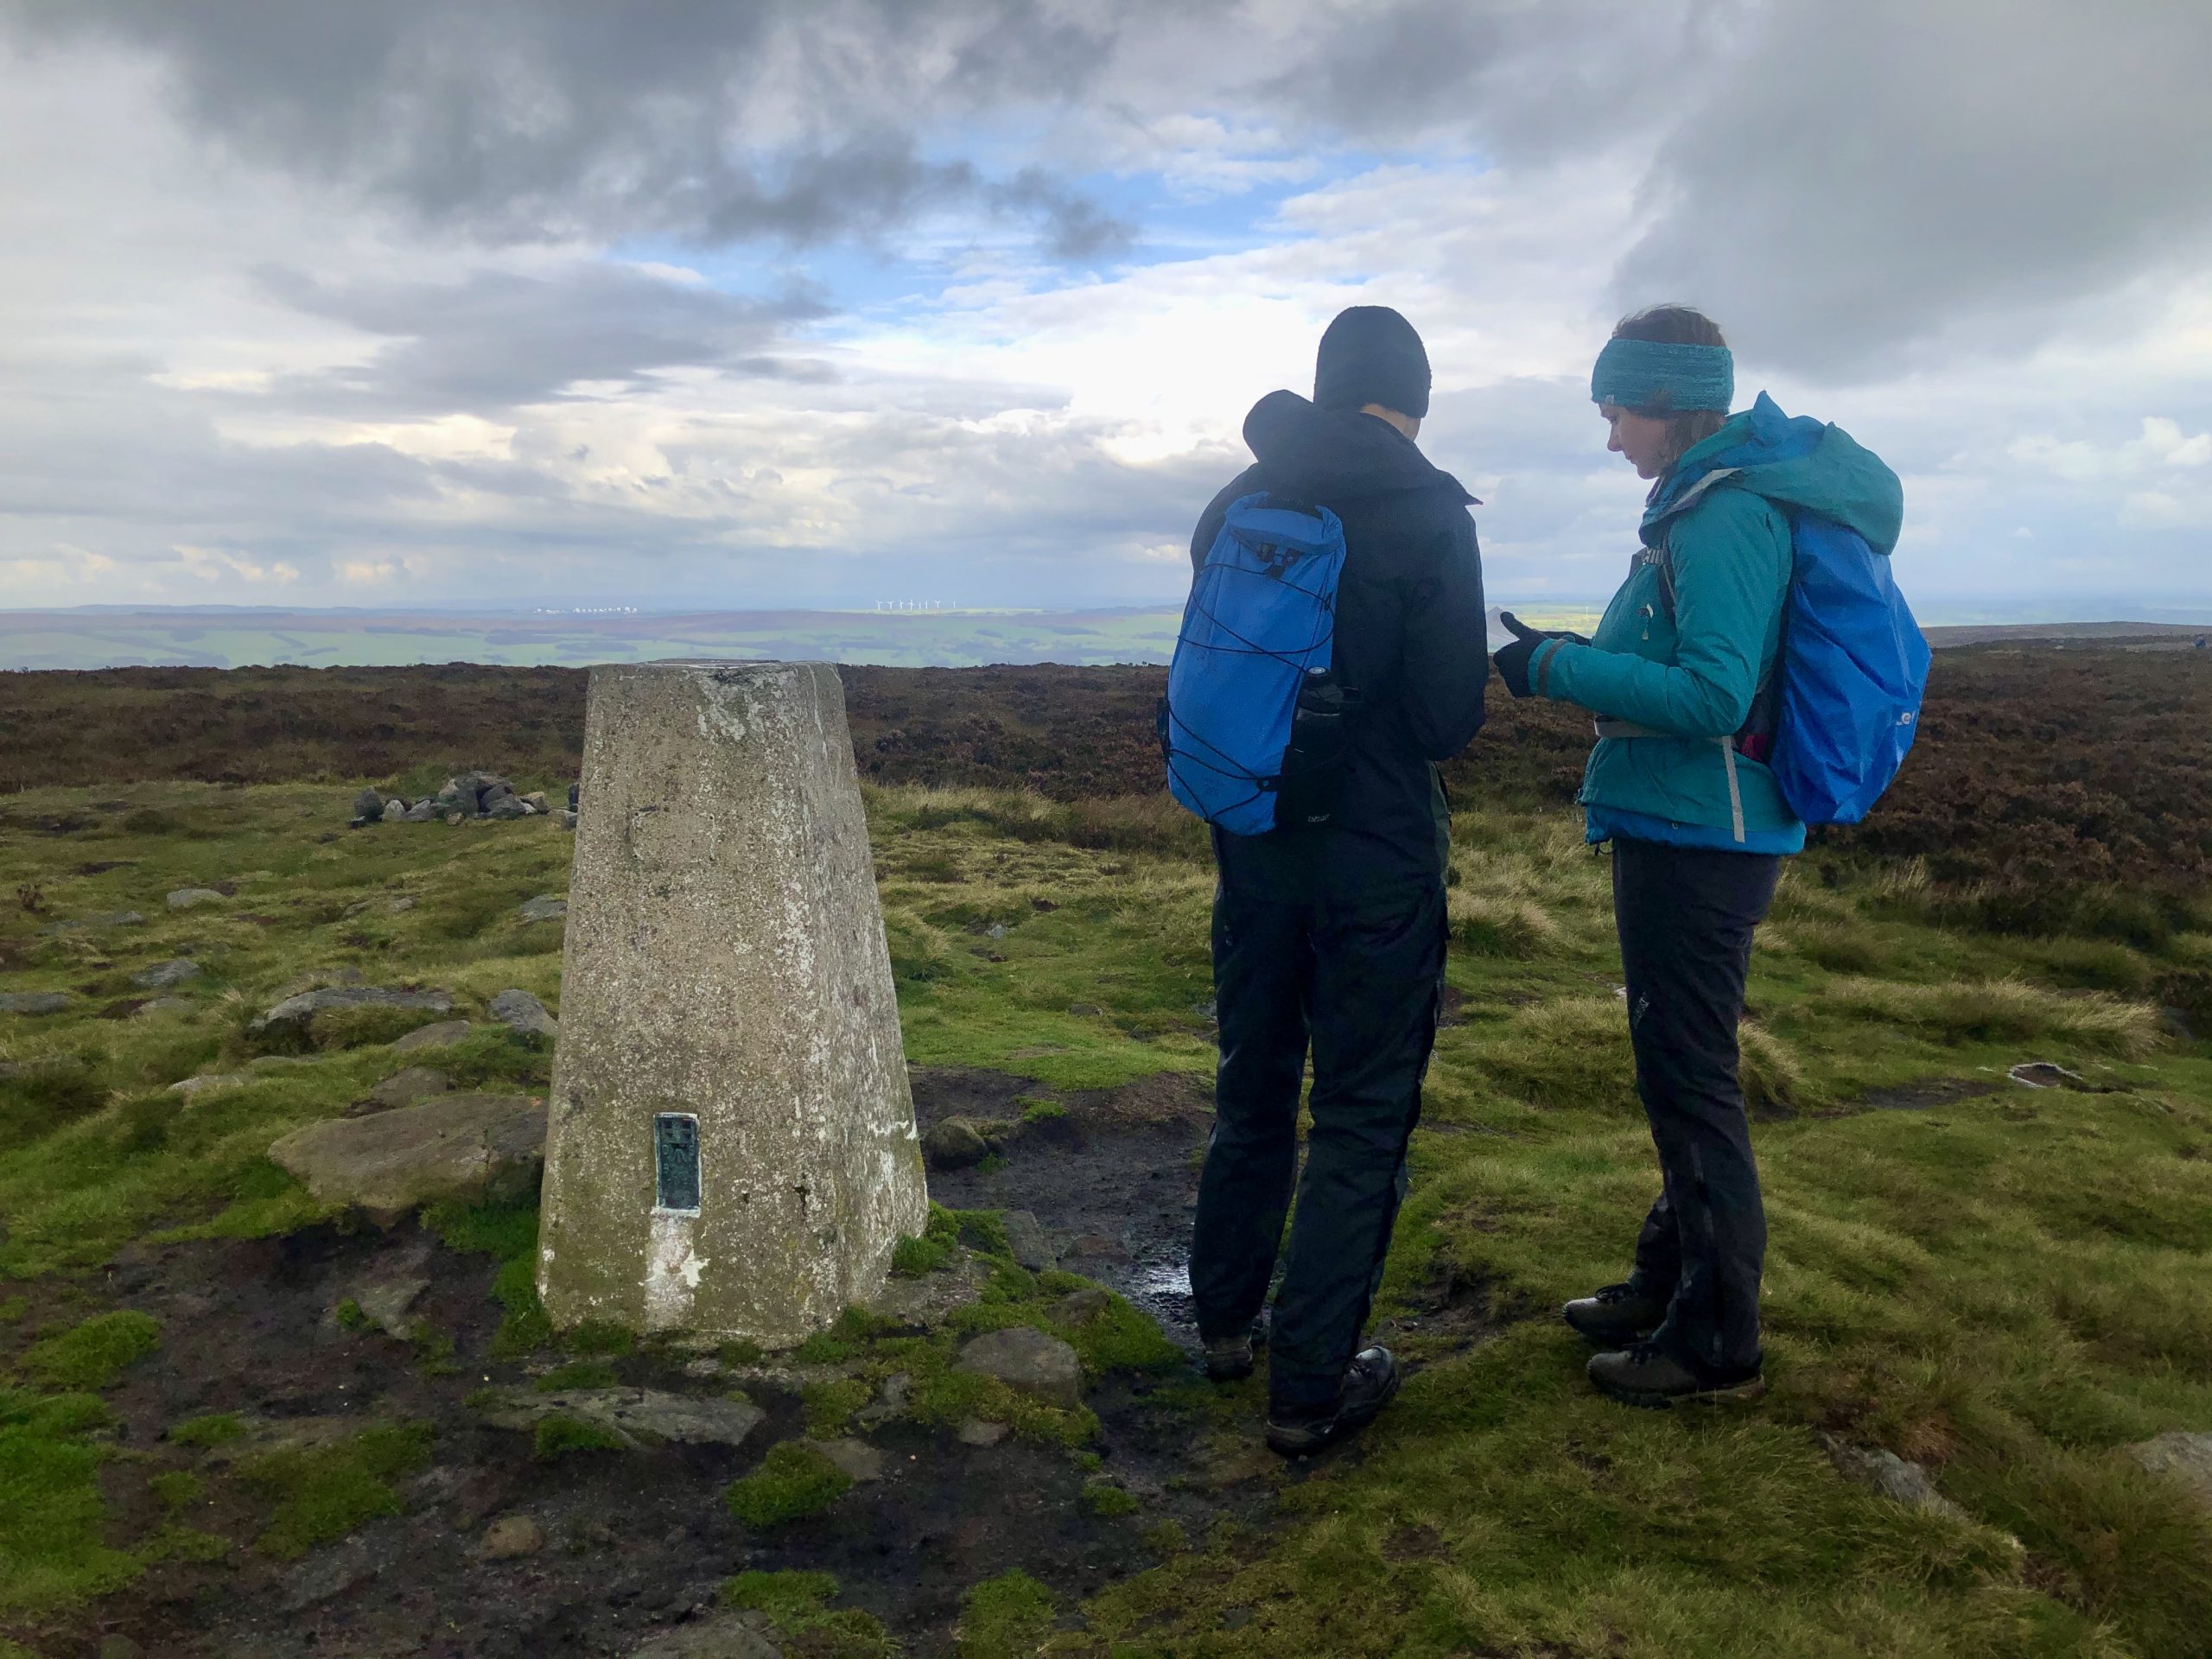 The view from Ilkley Moor during a navigation course in the Yorkshire Dales